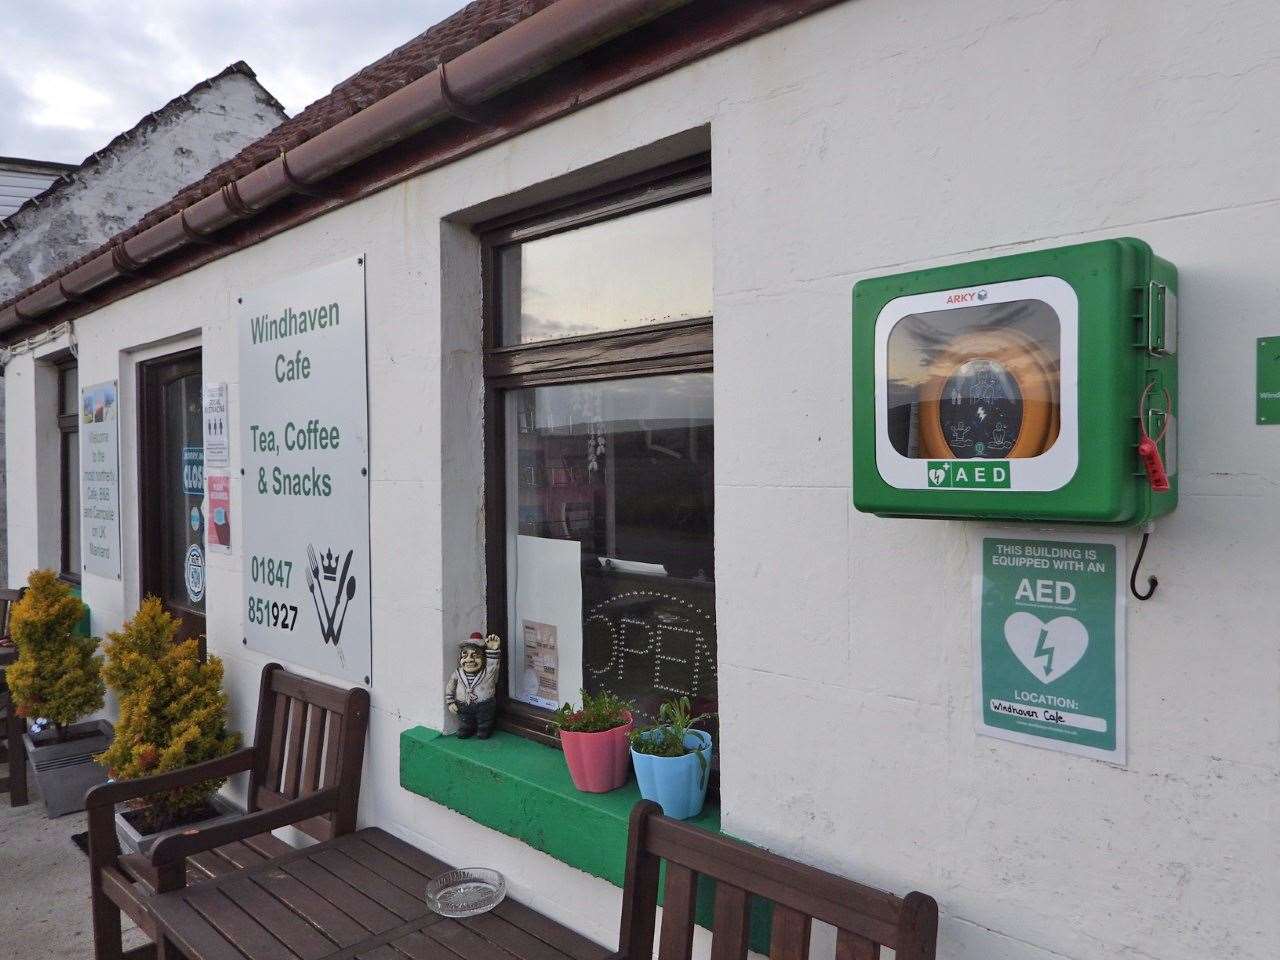 The new defibrillator at the Windhaven Cafe in Brough.